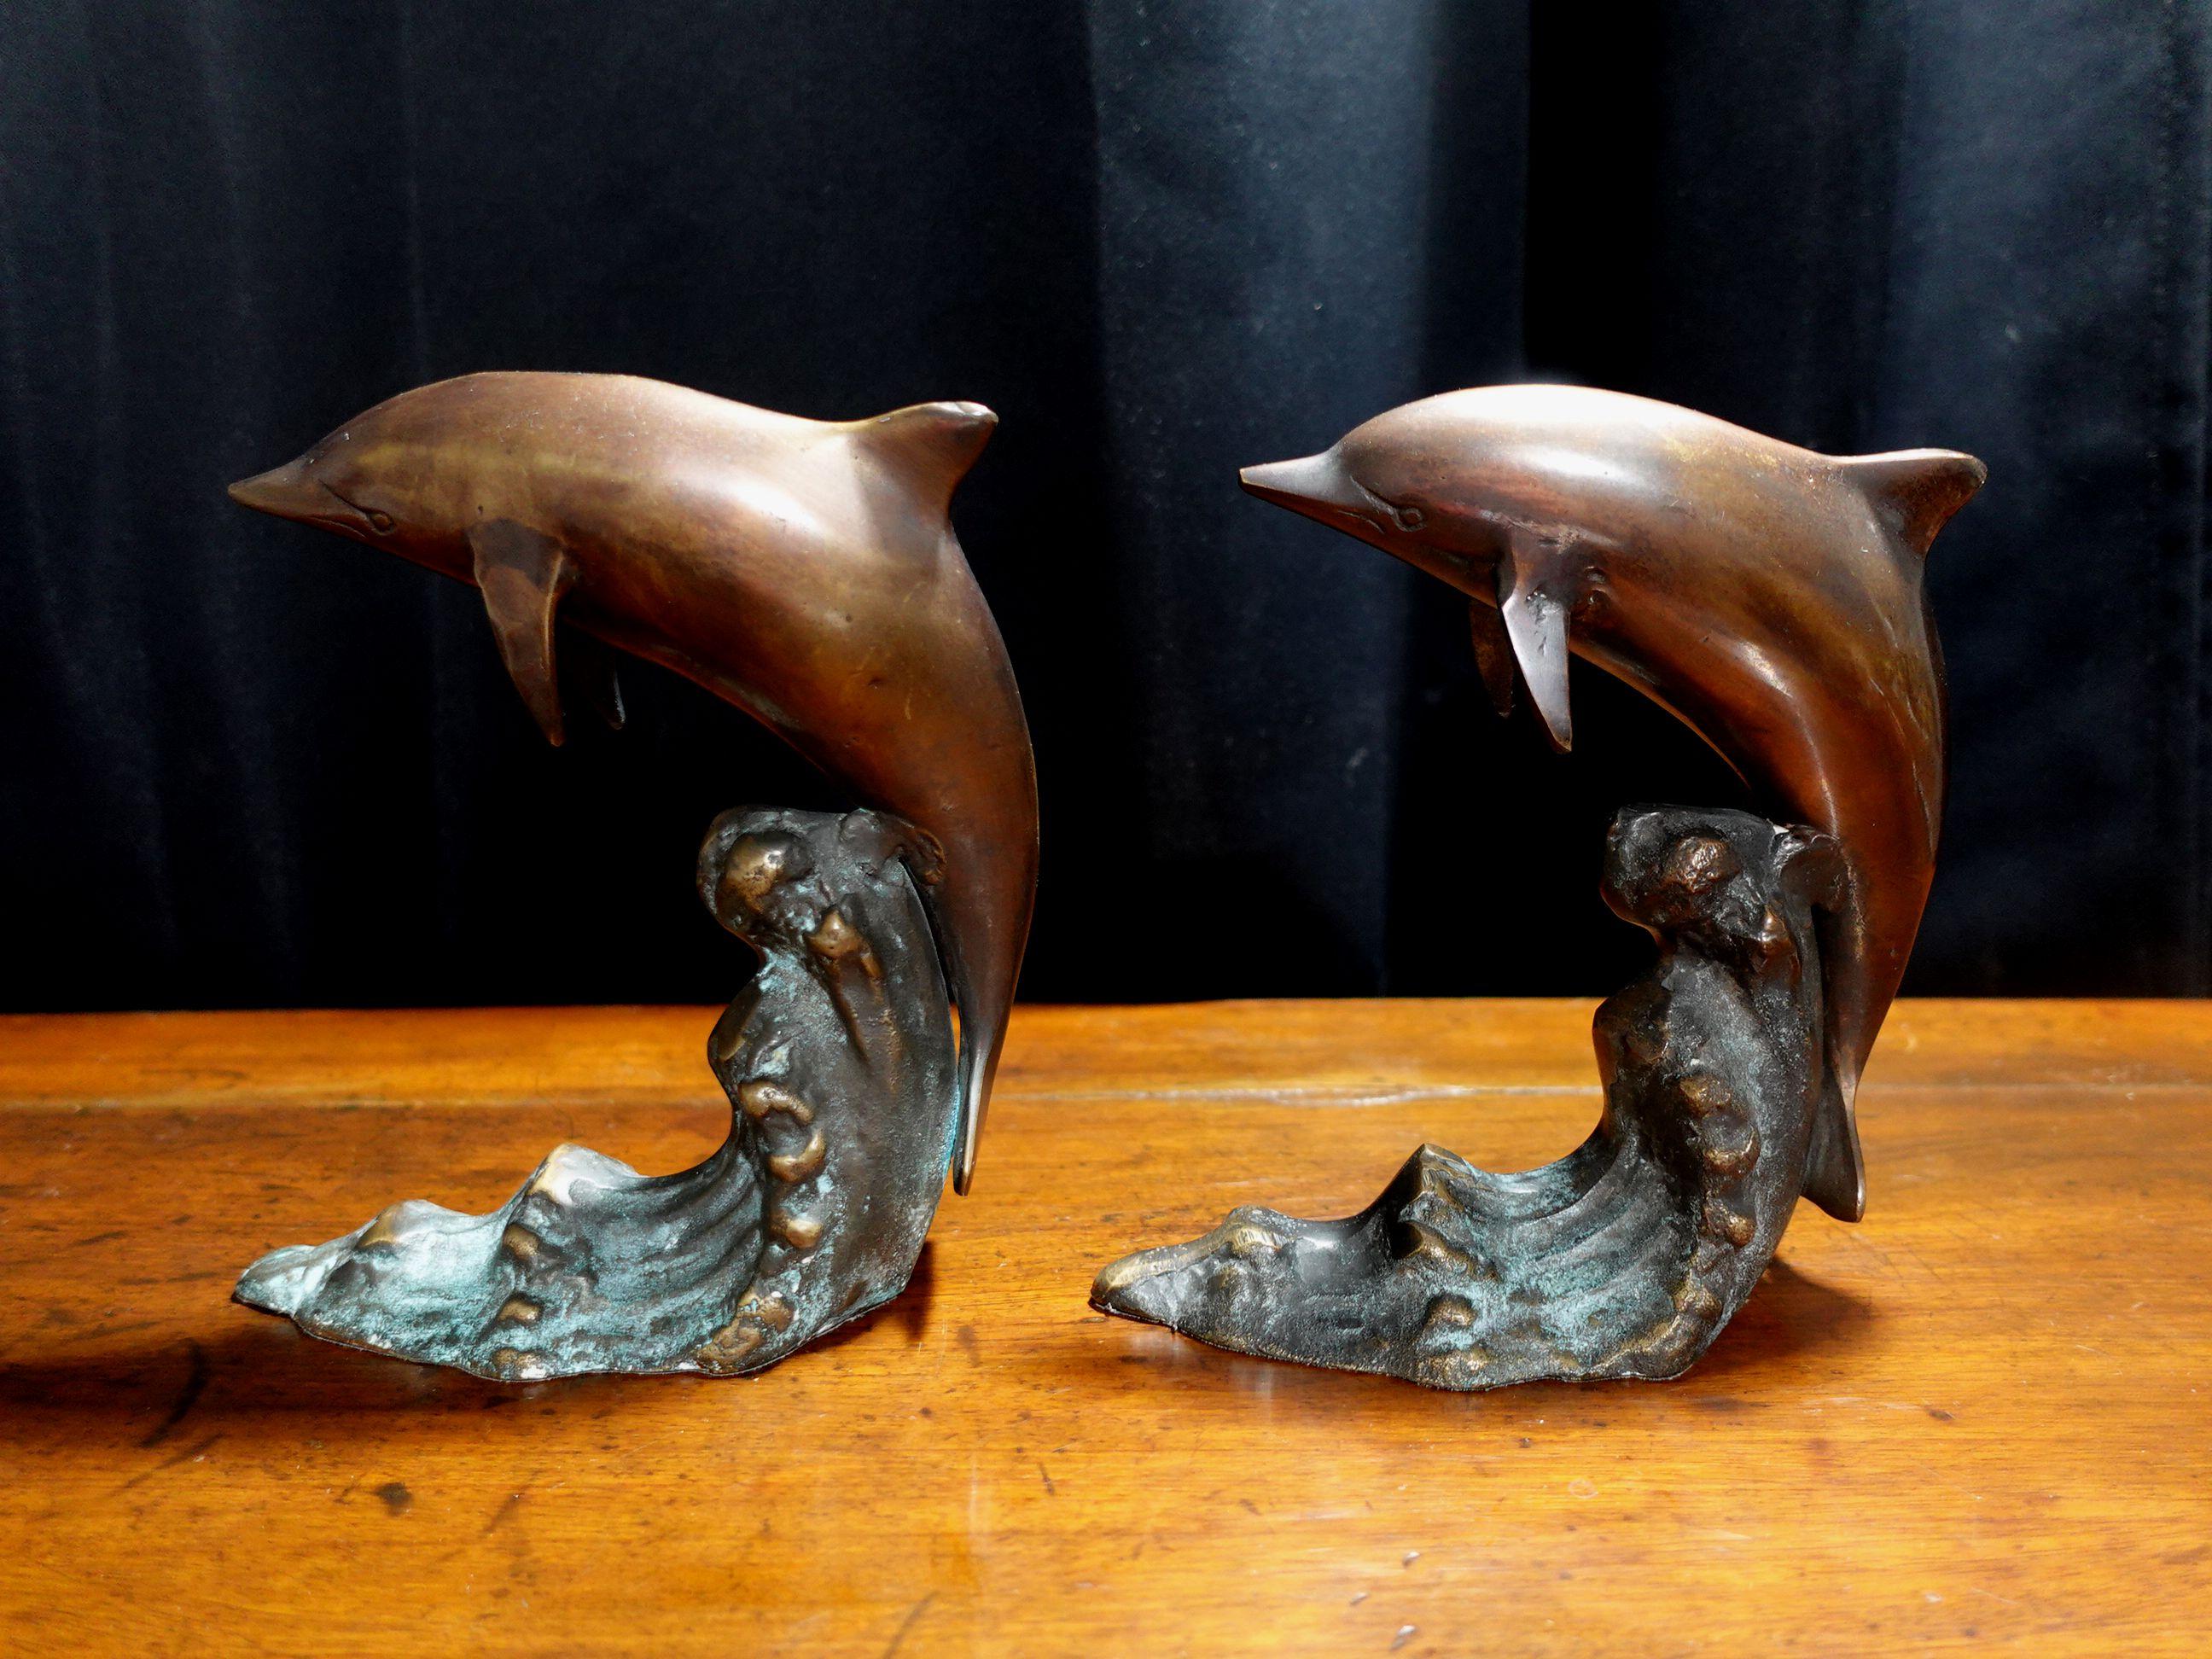 A pair of bookend dolphins made in bronze from the mid 20th century are very cute objects and nice to display with your books together.
 